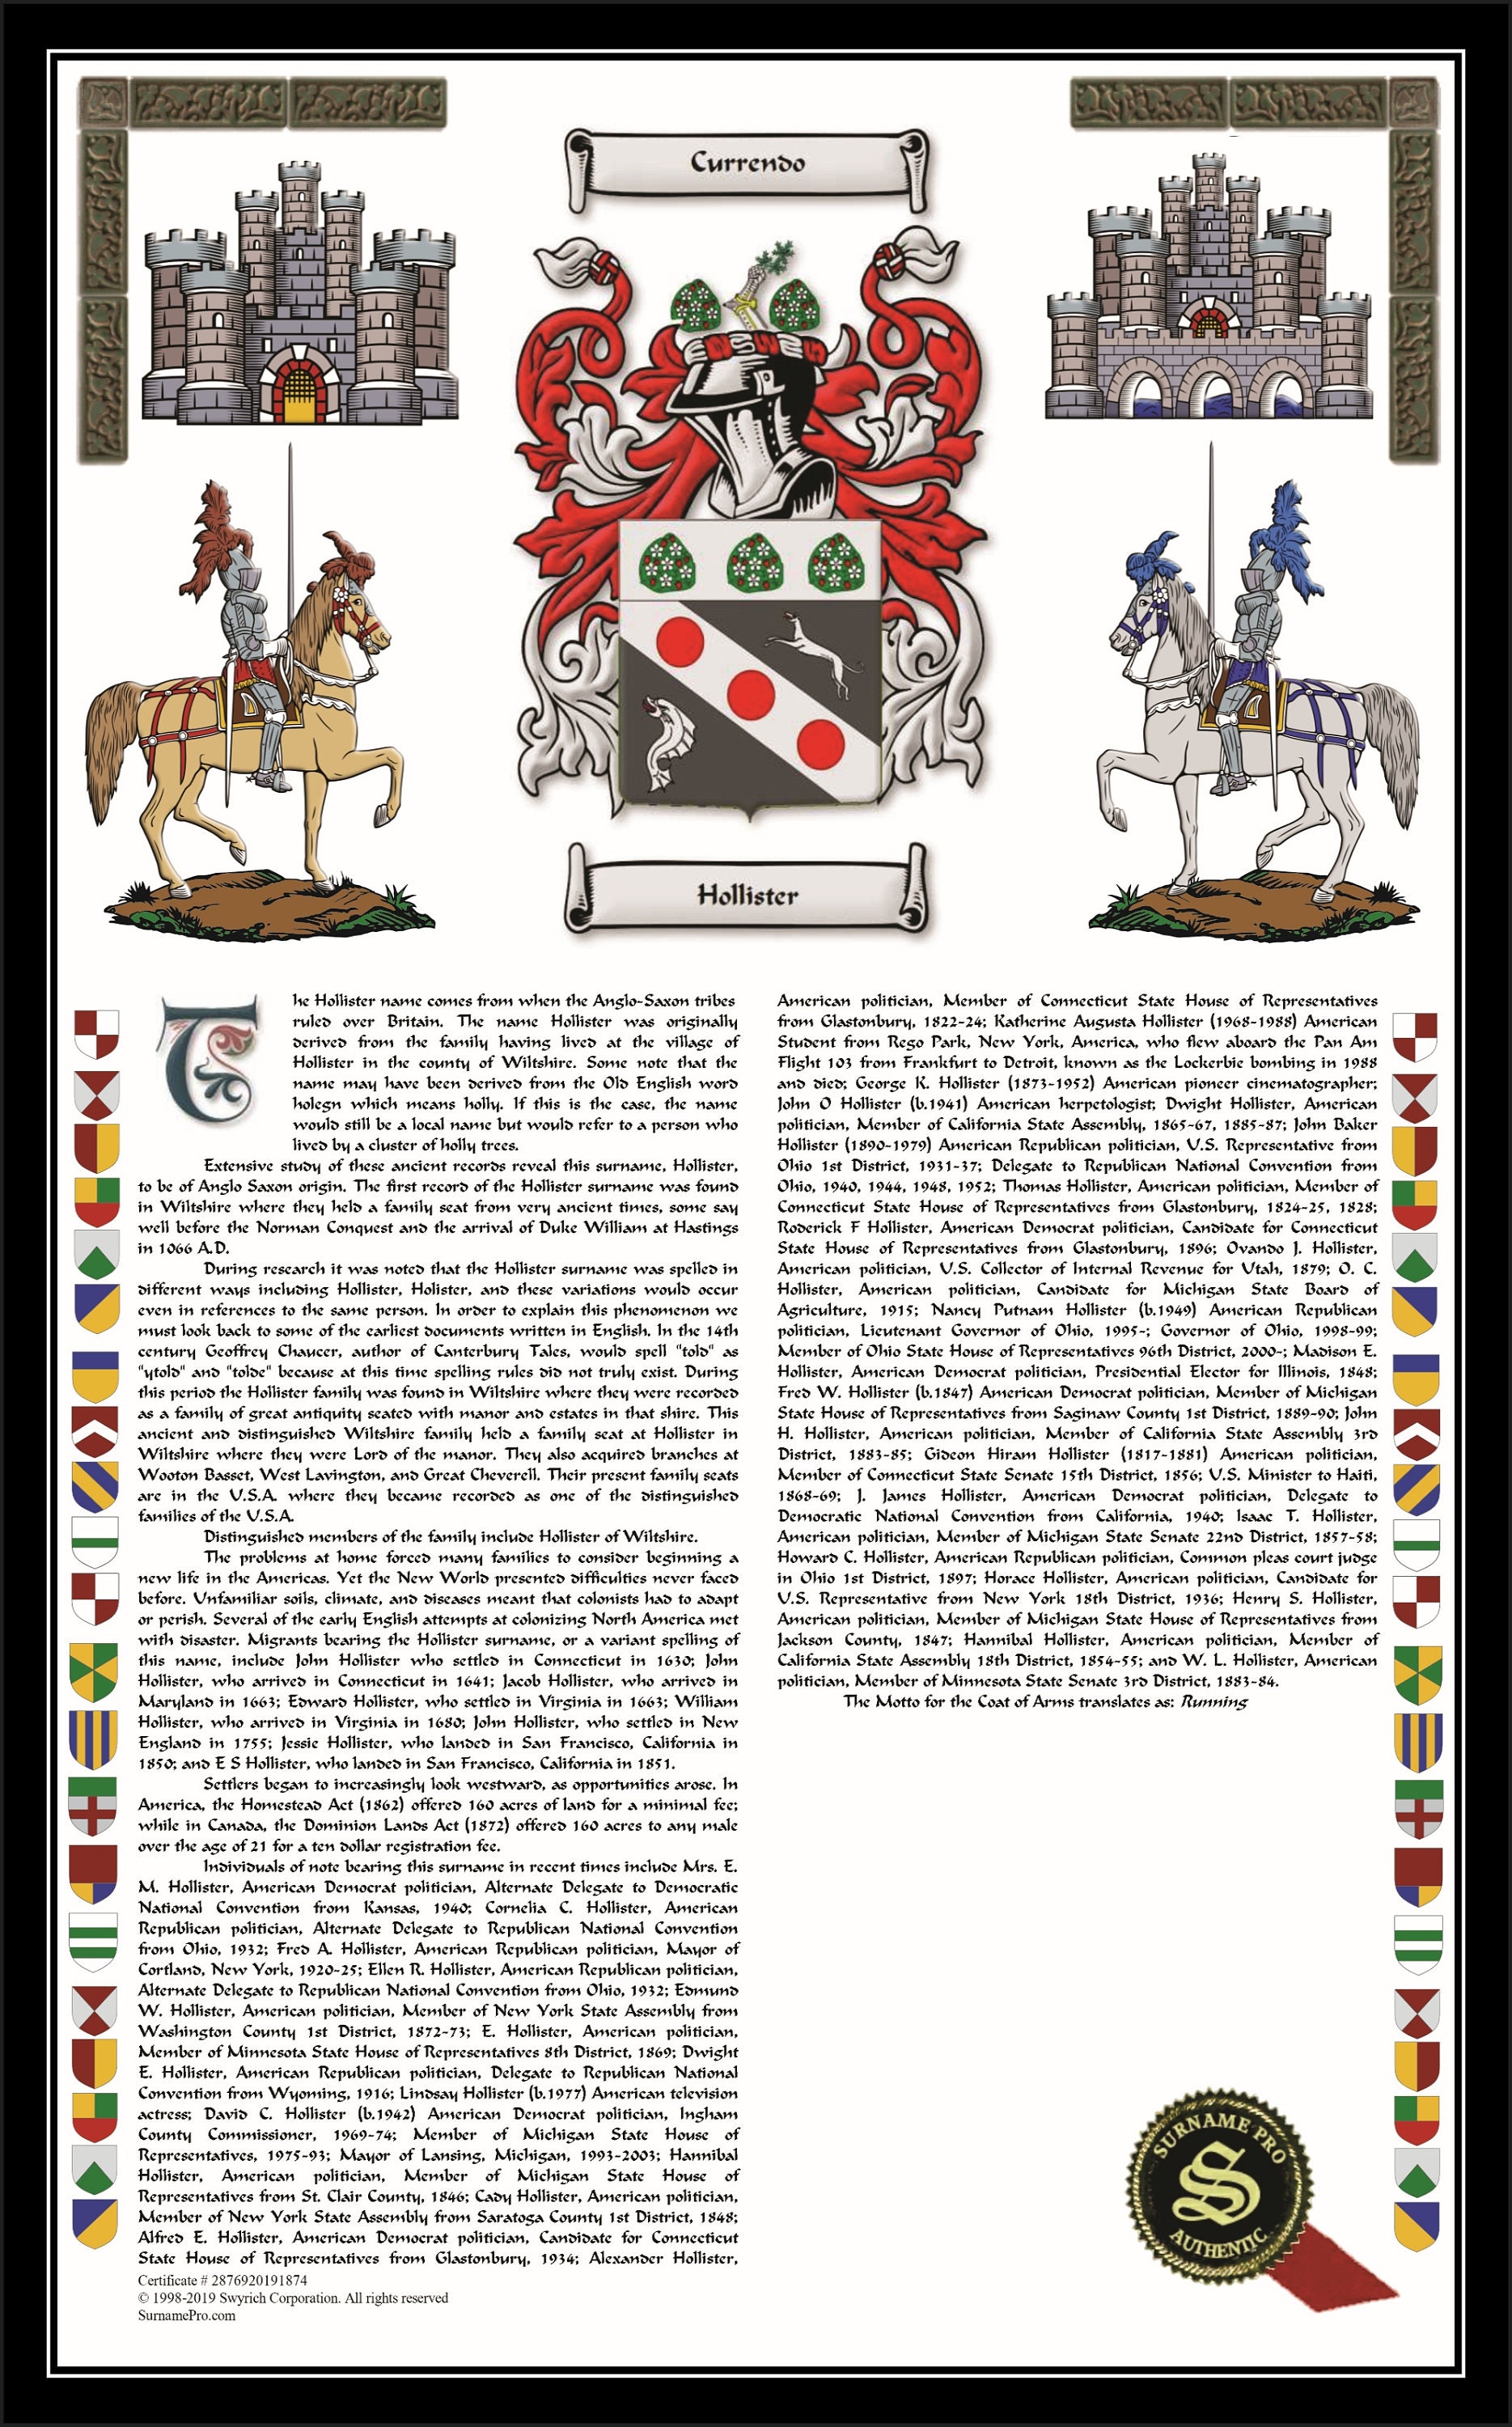 Heller Name Meaning, Family History, Family Crest & Coats of Arms